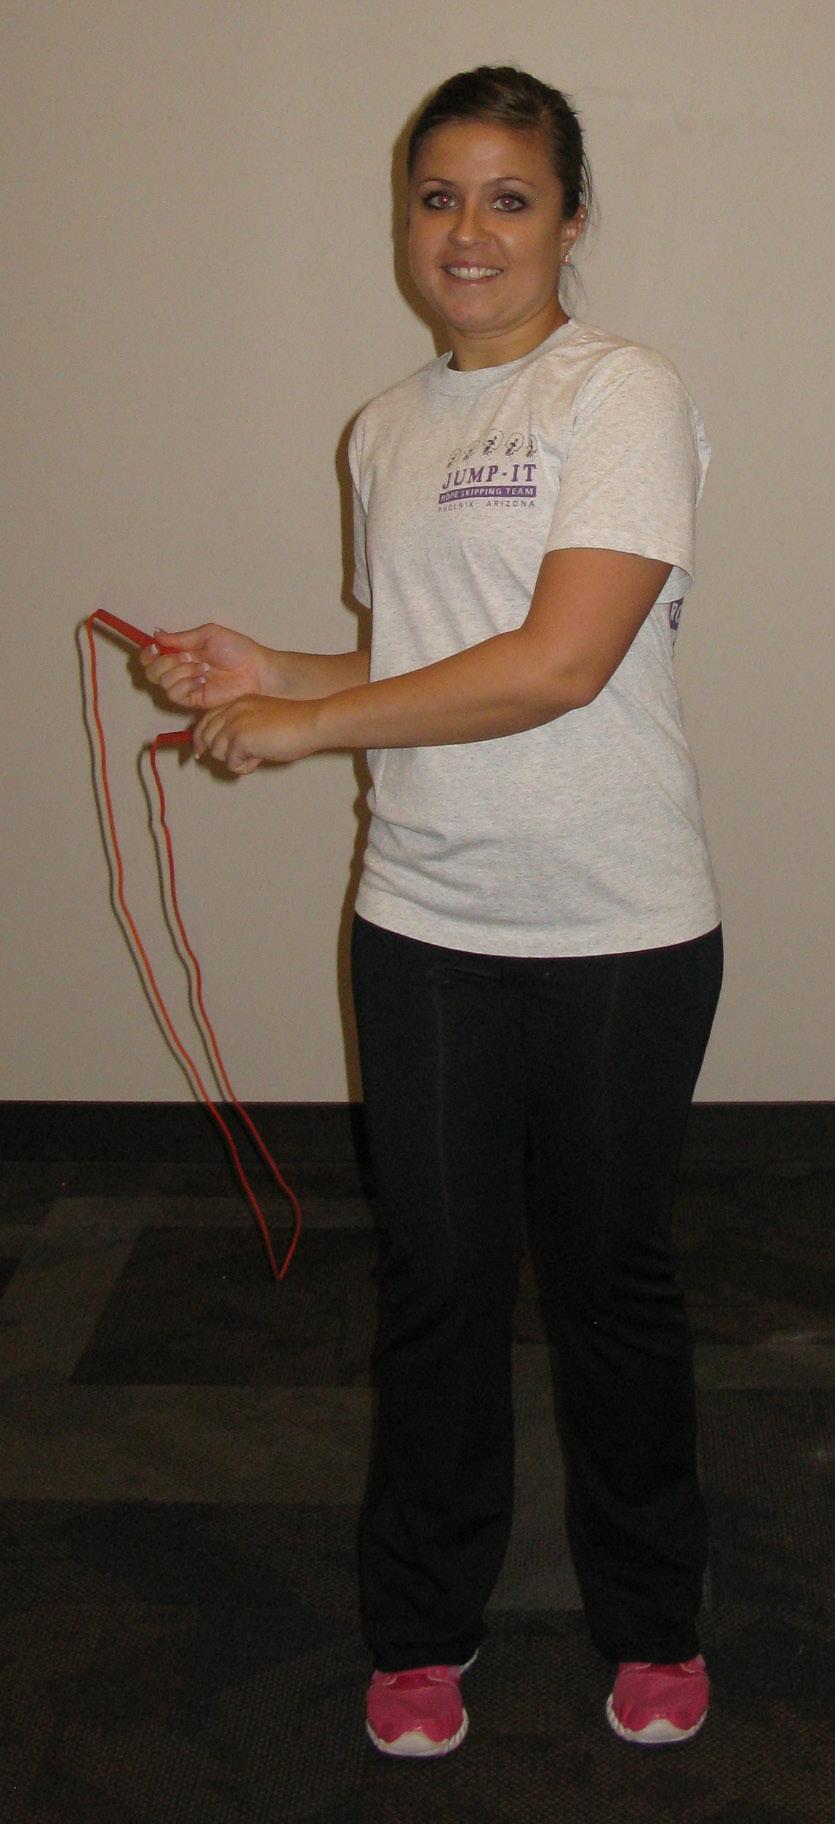 When teaching tricks involving rope manipulation with the hands, it is important to use cues and to recognize when mastery of a skill is achieved.